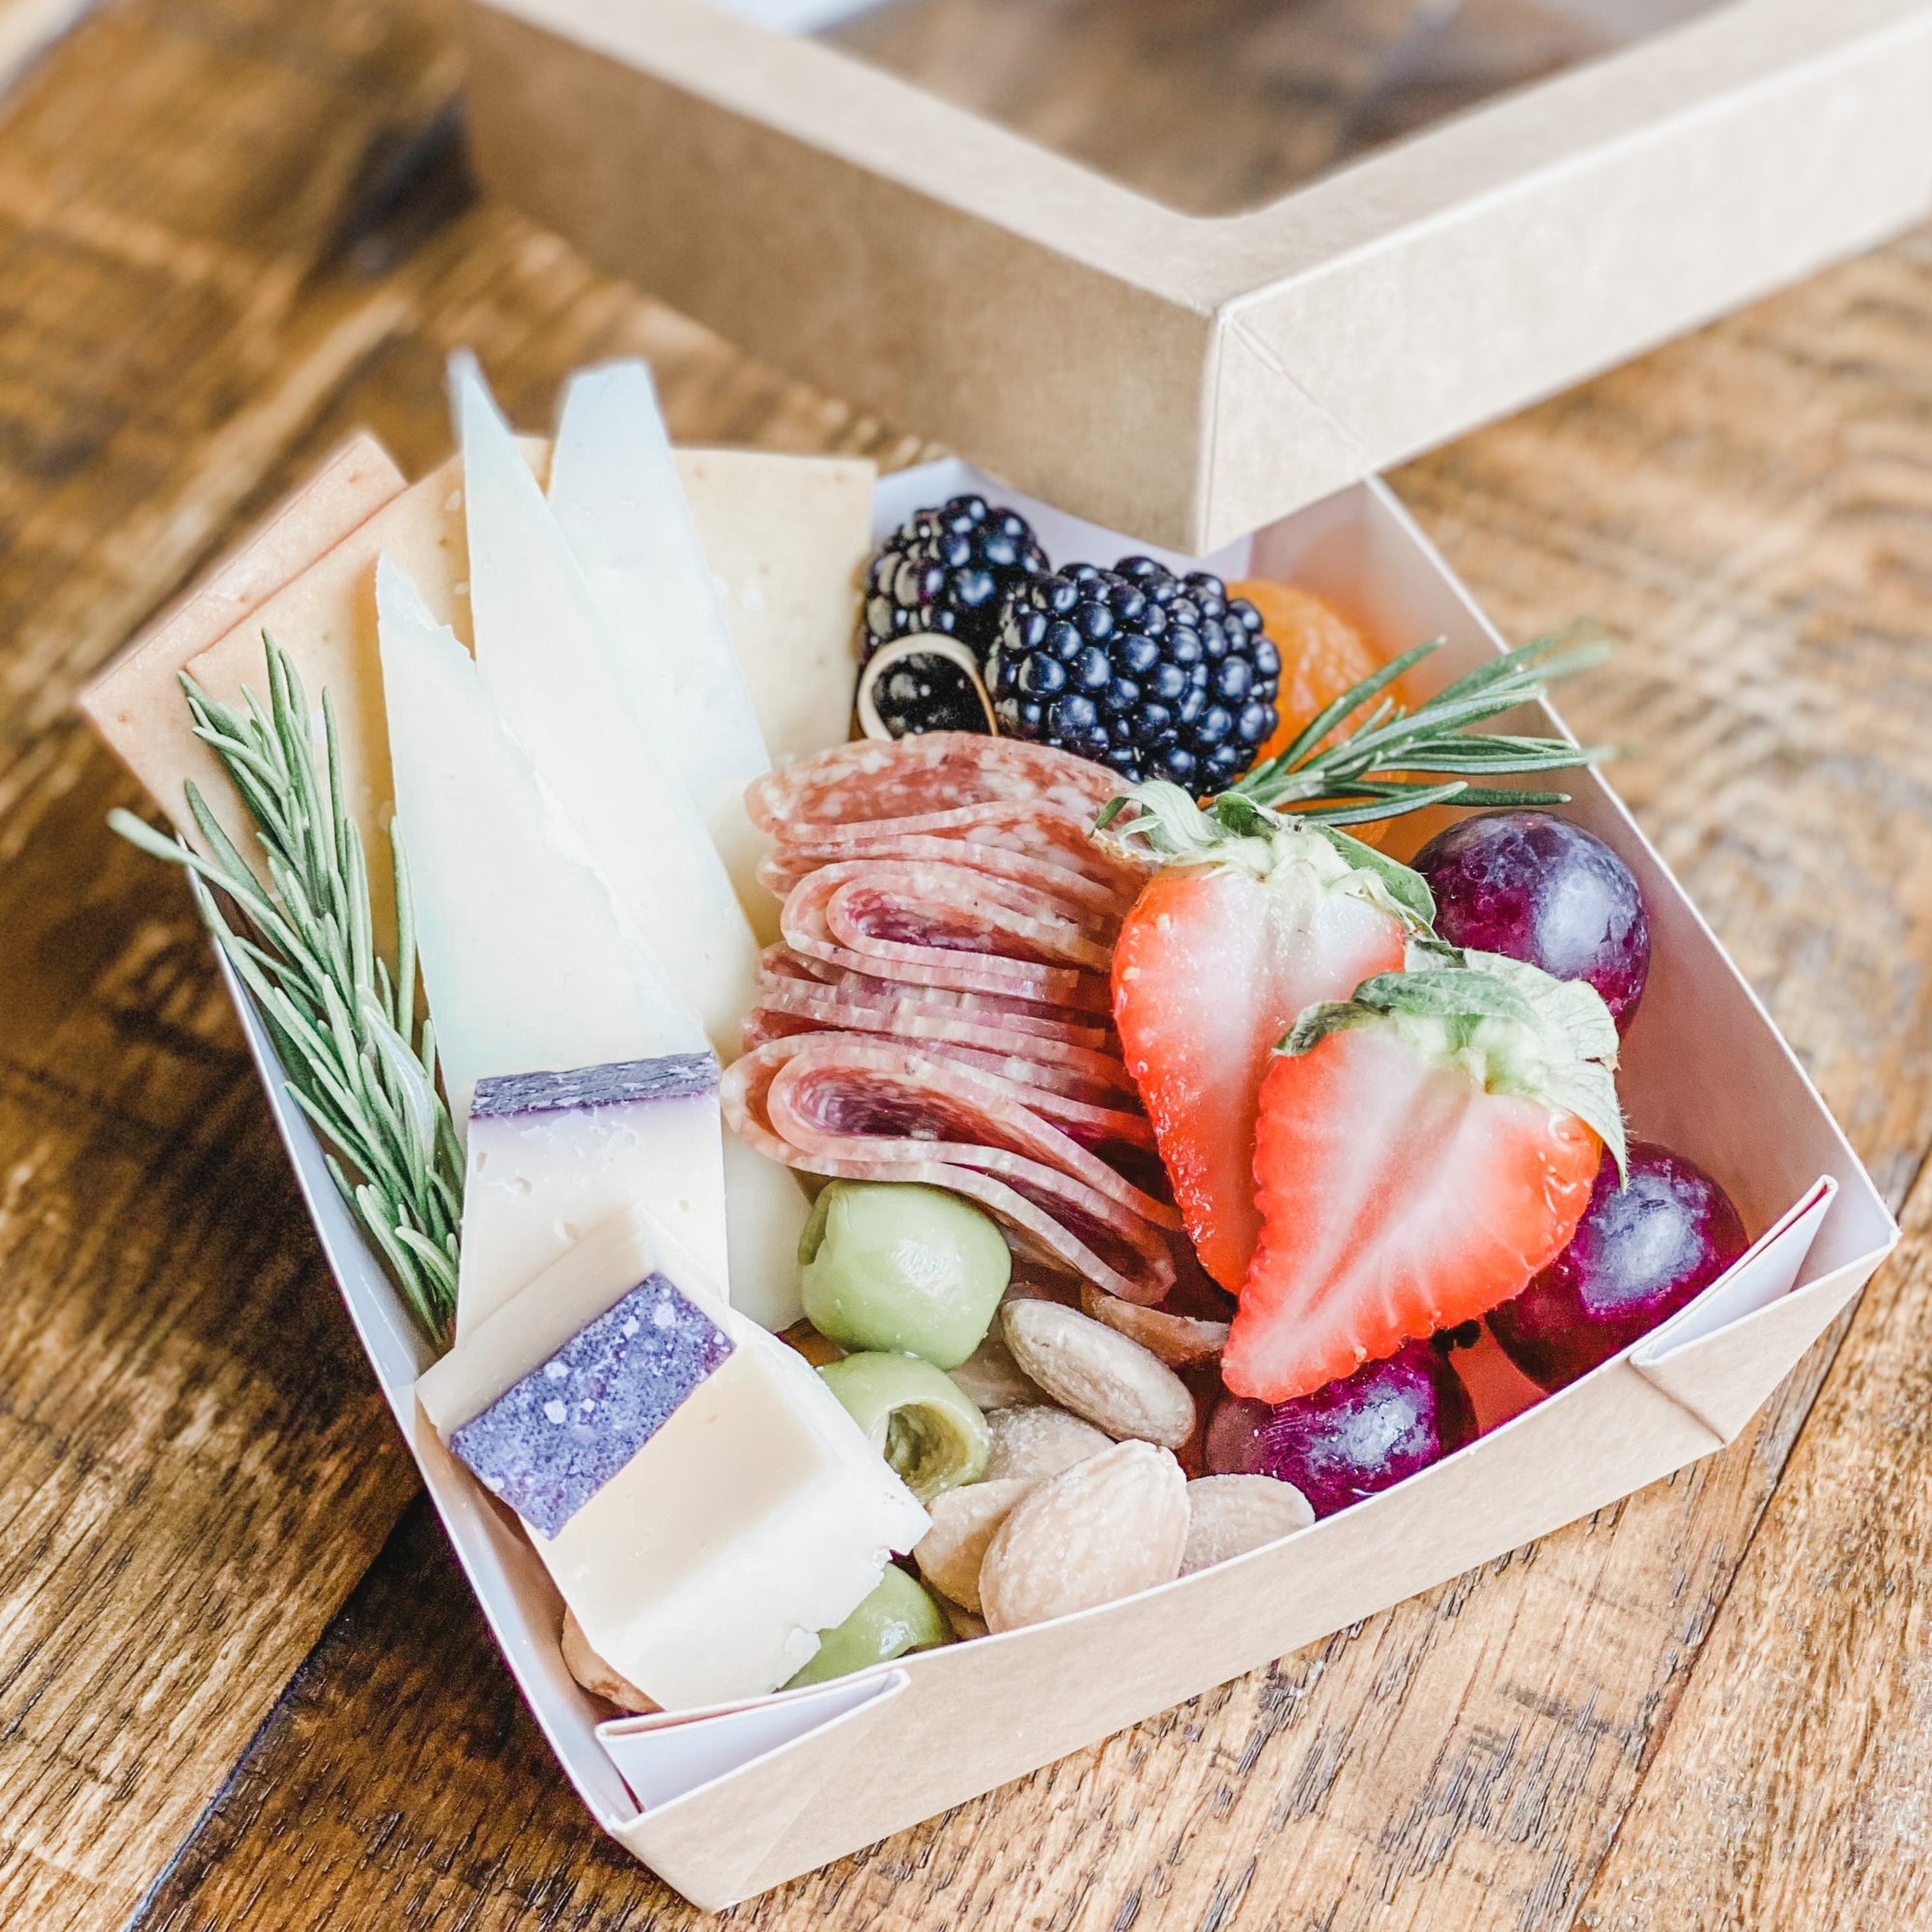 The Perfect Travel Friendly Charcuterie Board – A Great Traveled Life